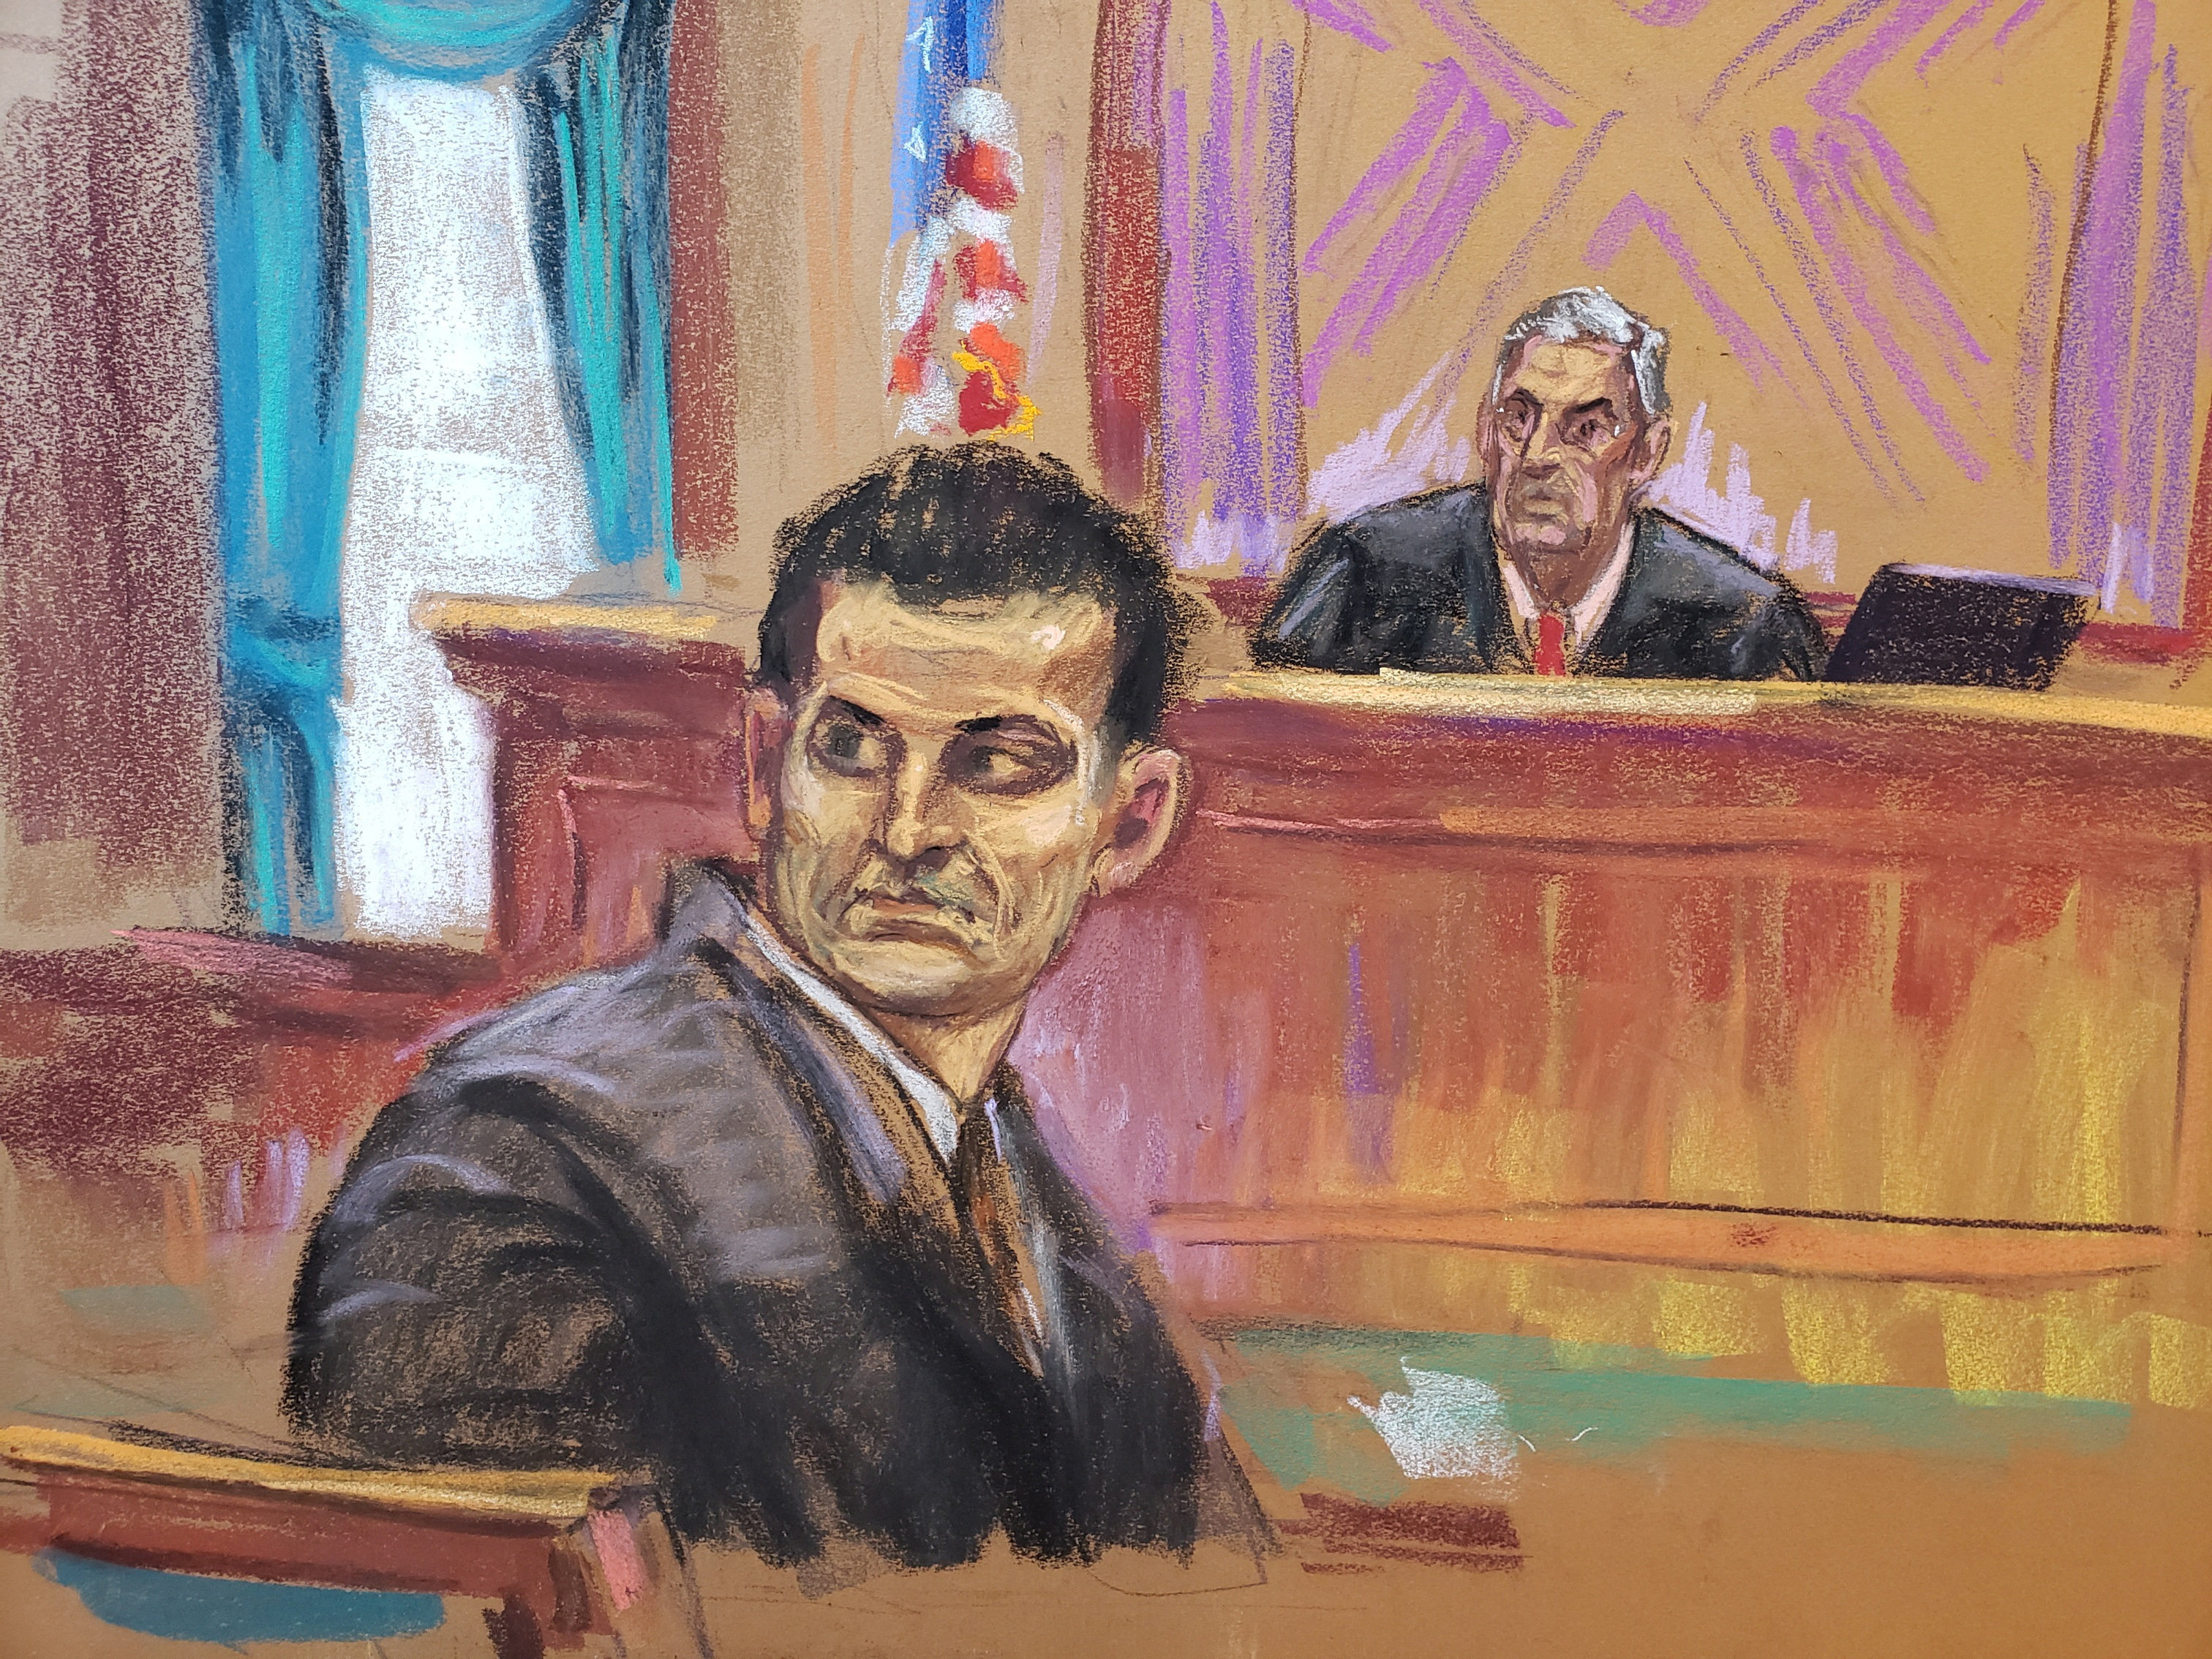 Sam Bankman-Fried turns to look at potential jurors for his fraud trial before US District Judge Lewis Kaplan in New York on Tuesday. Courtroom sketch: Jane Rosenberg via Reuters